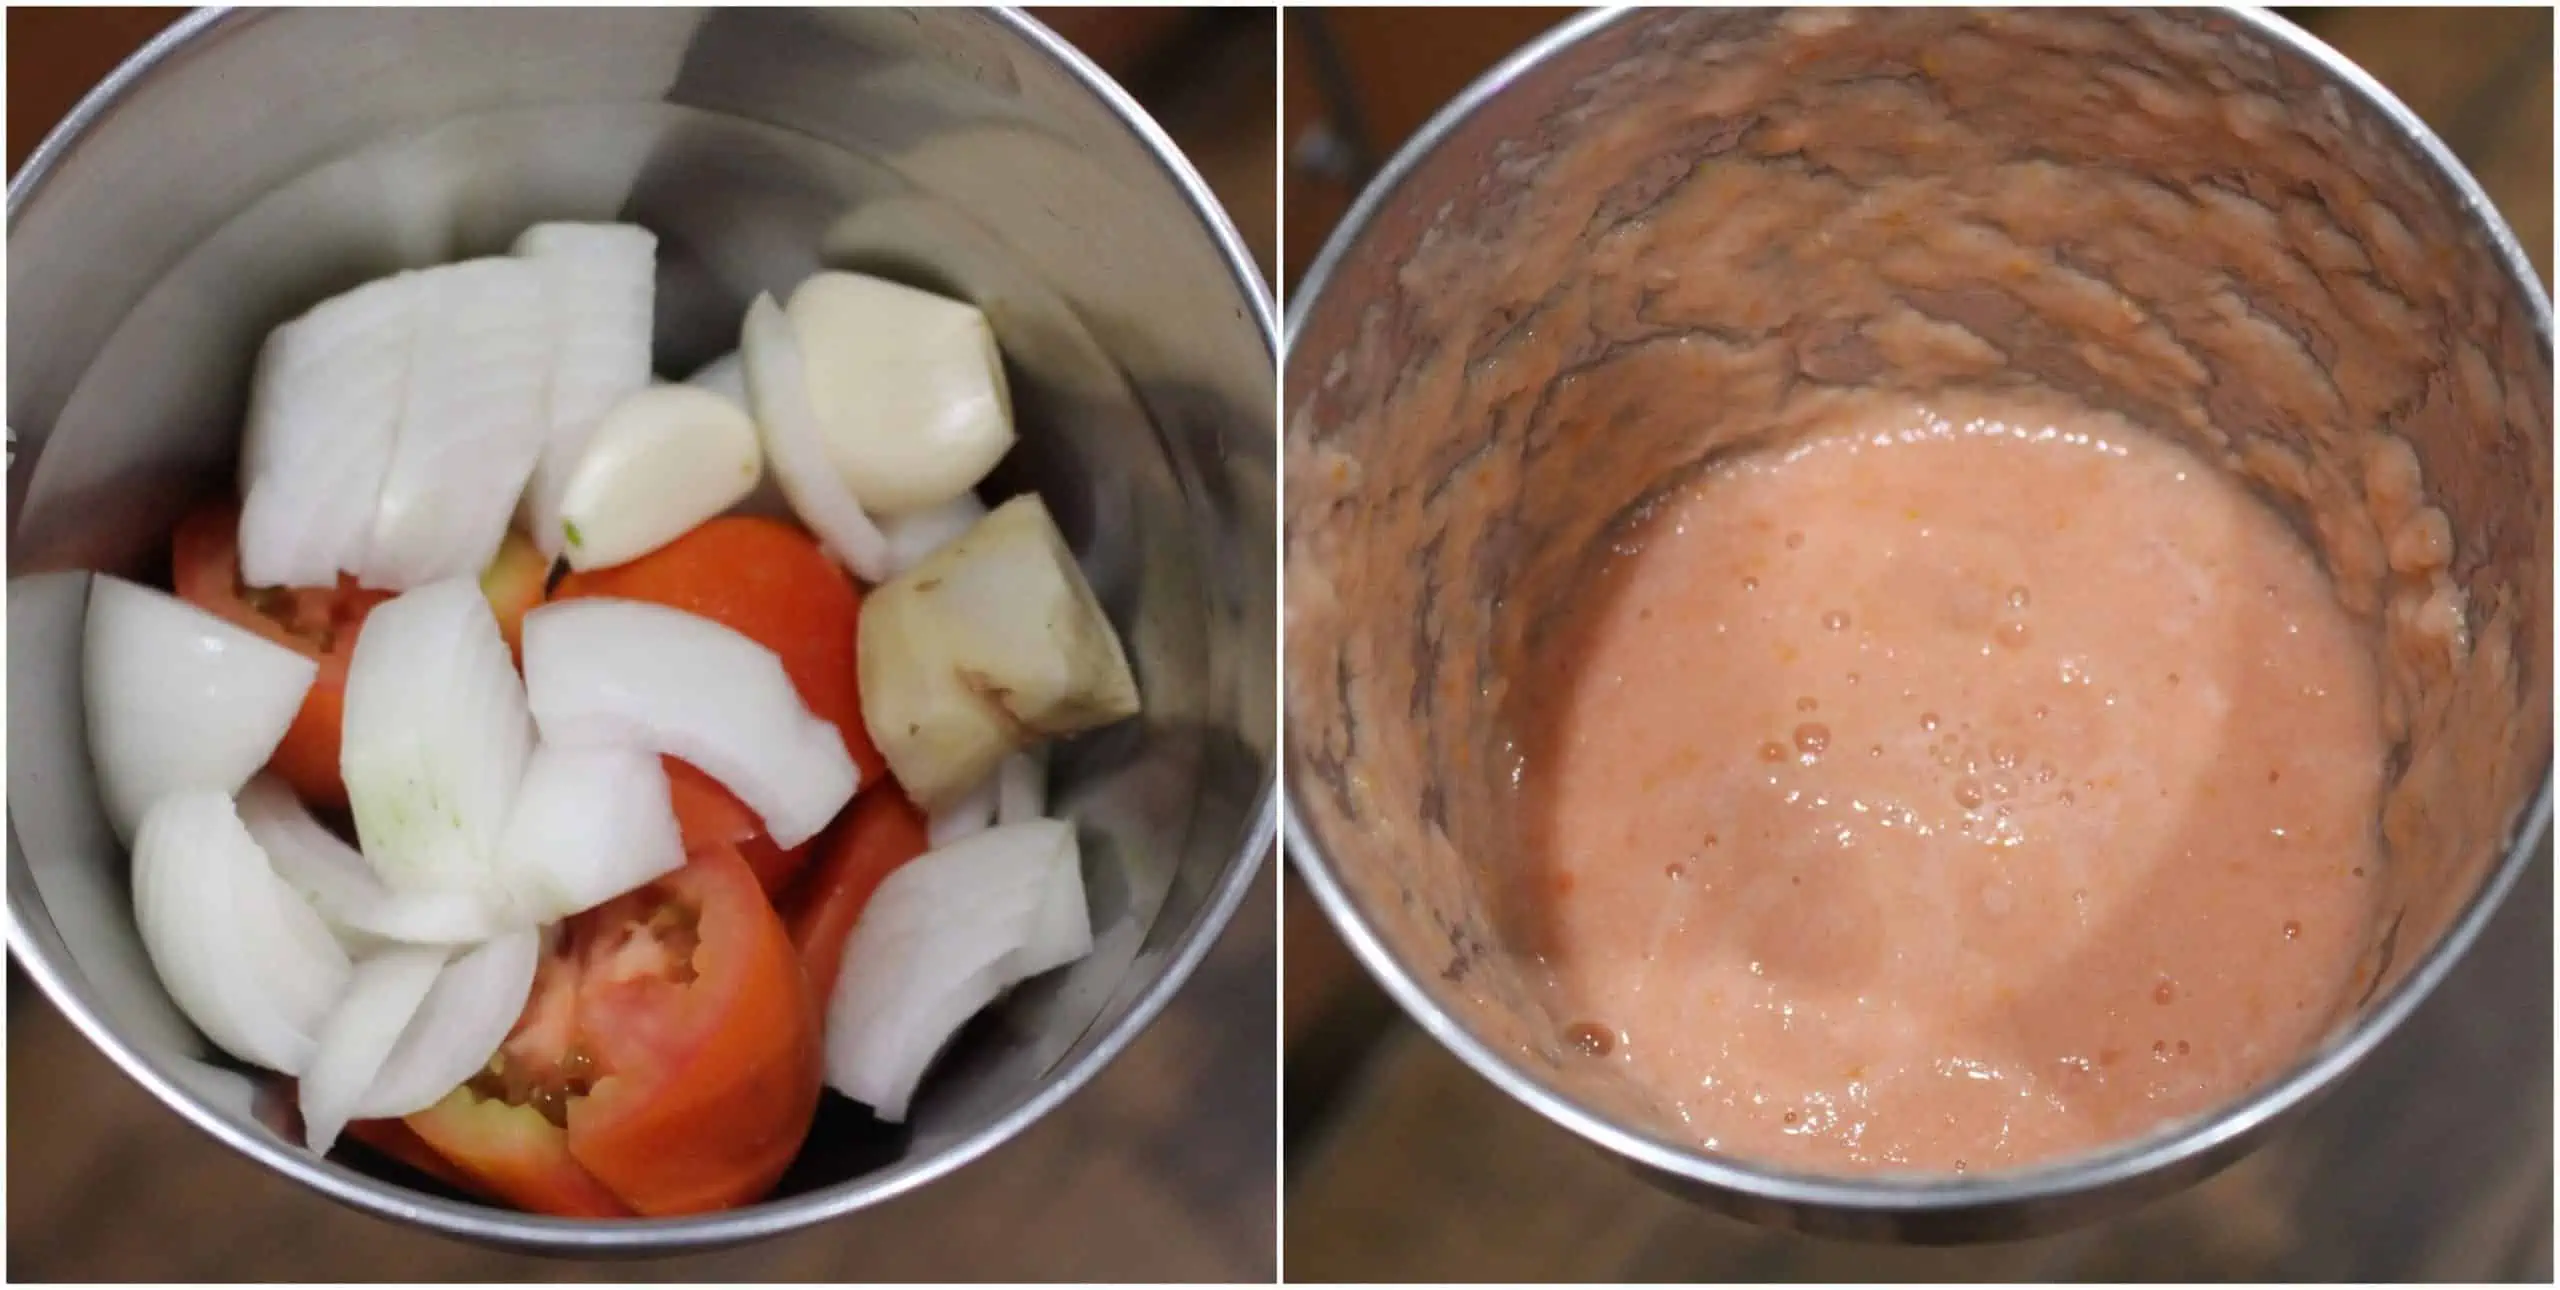 Onion and tomato in a blender jar and pureed mixture.